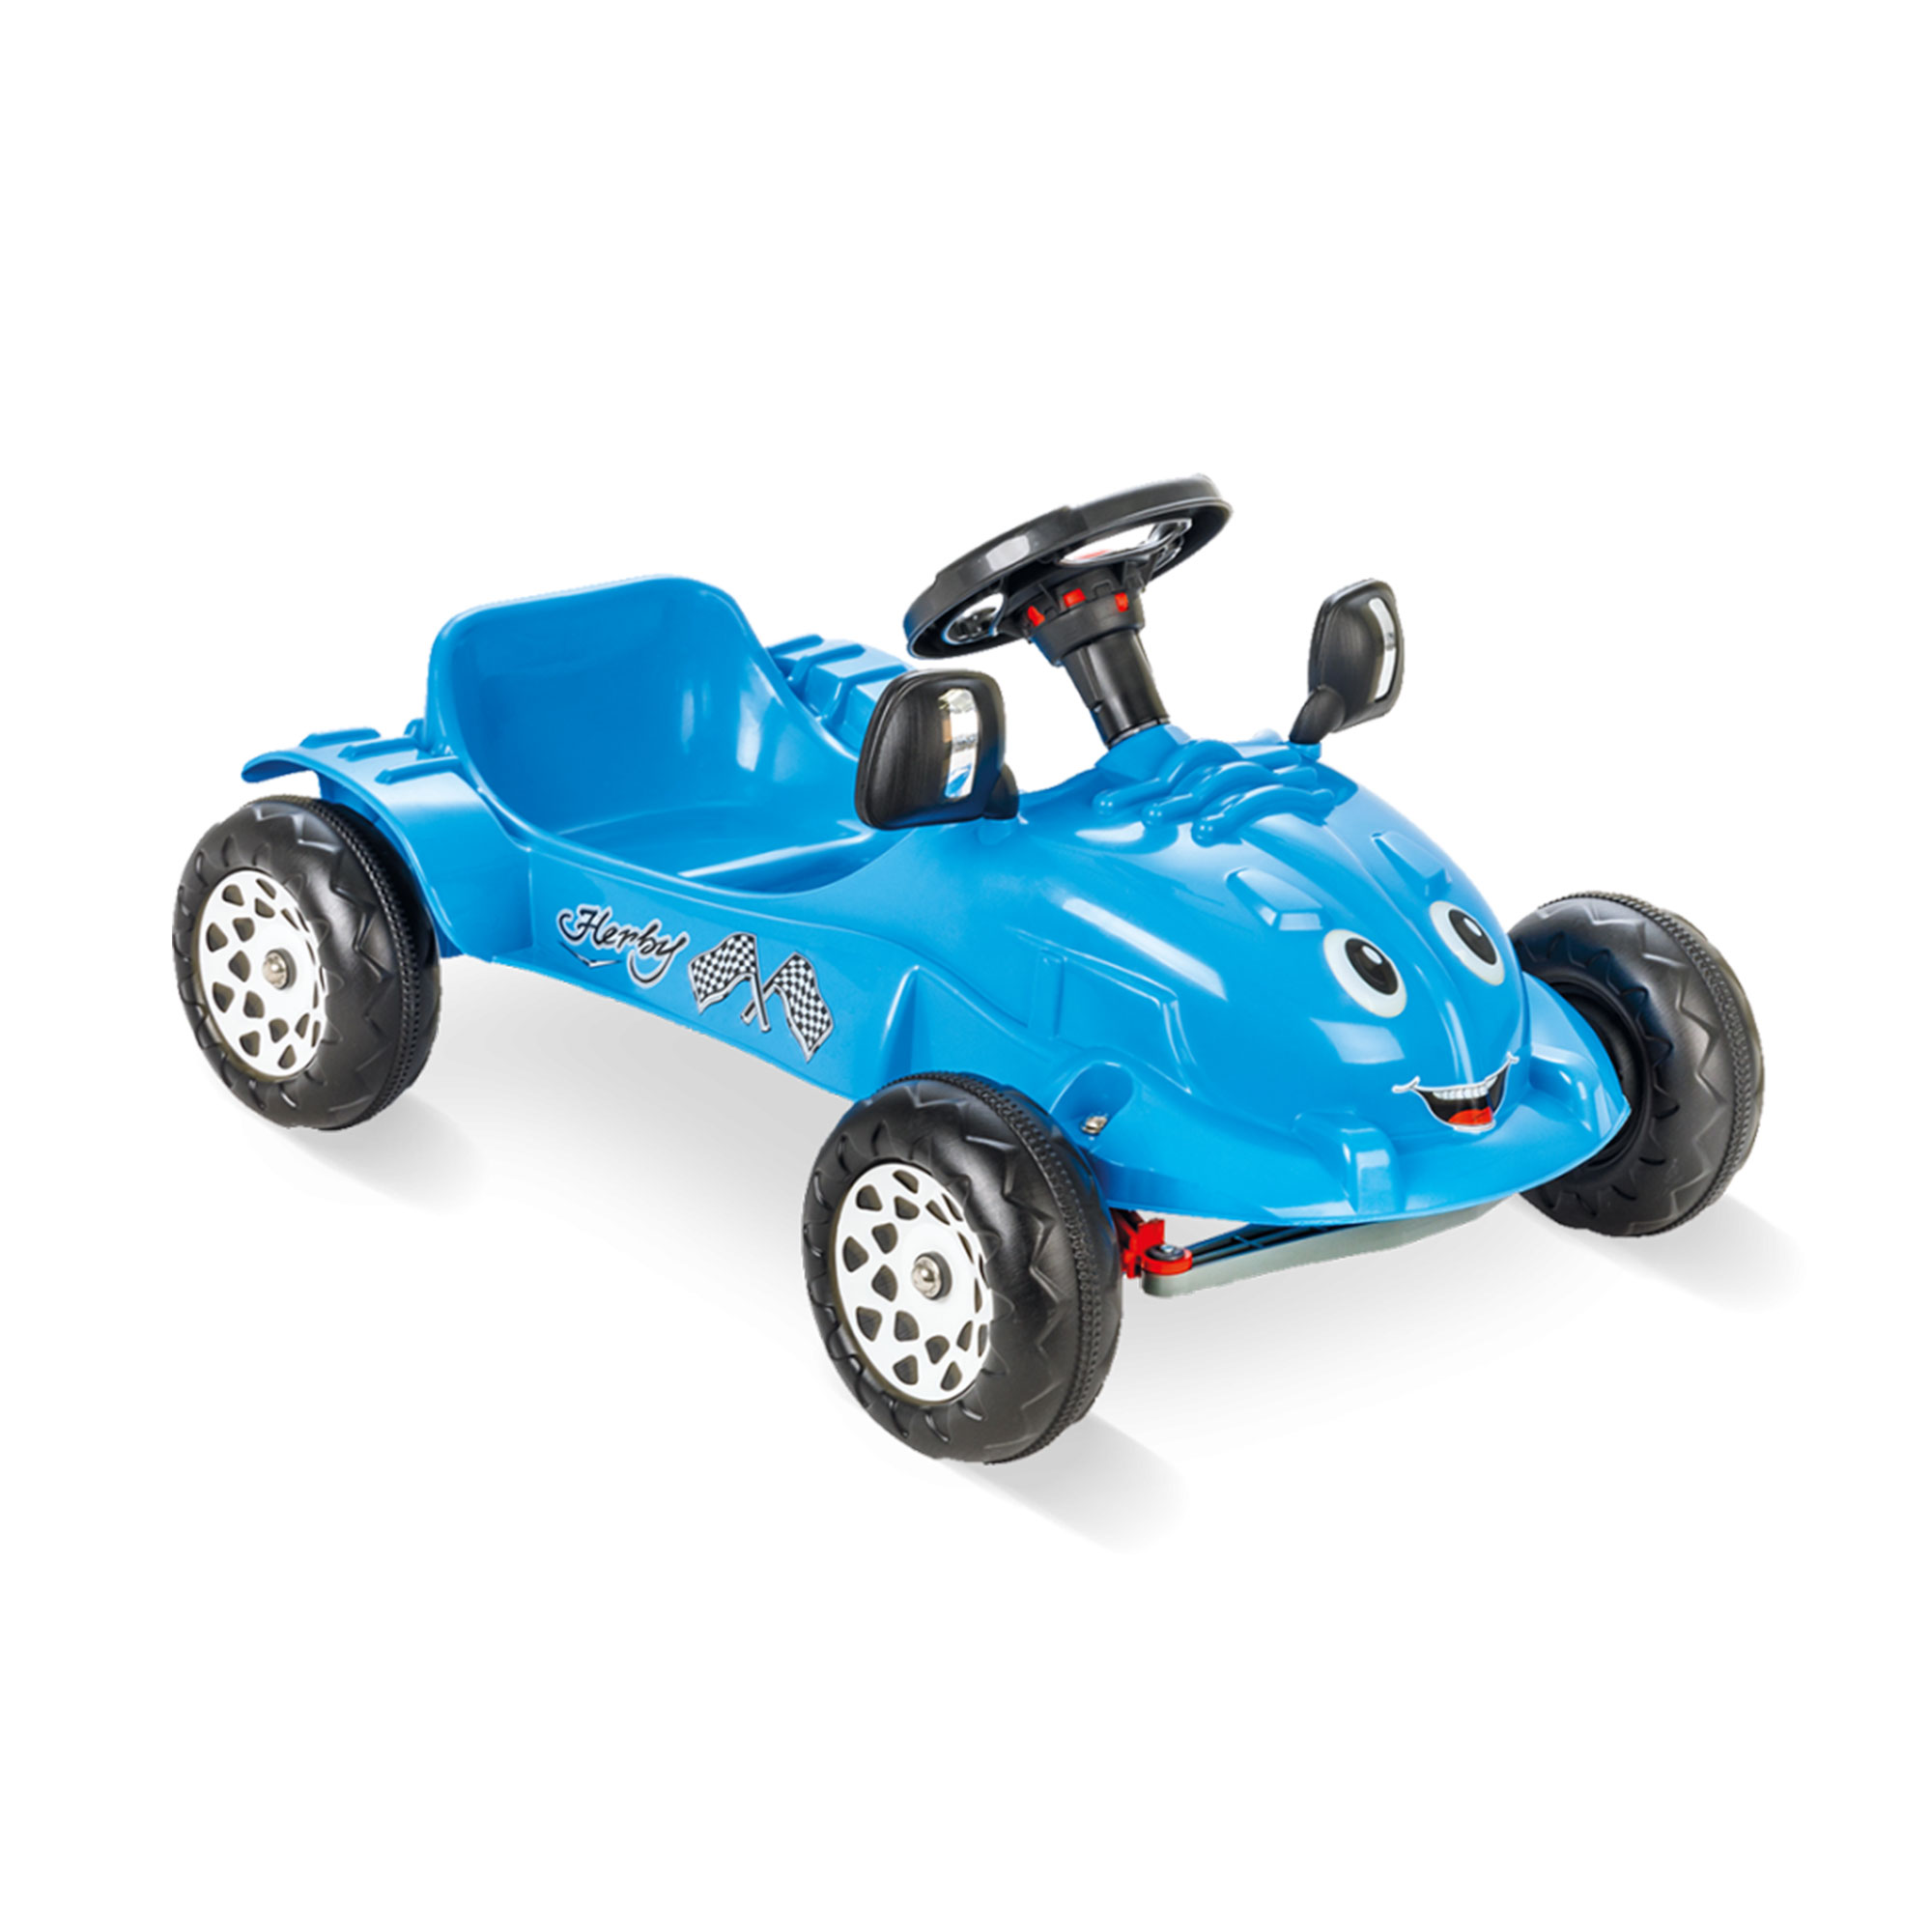 Pilsan Herby Pedal Car w/ Moving Mirrors and Horn for Ages 3 & Up, Blue - image 1 of 5